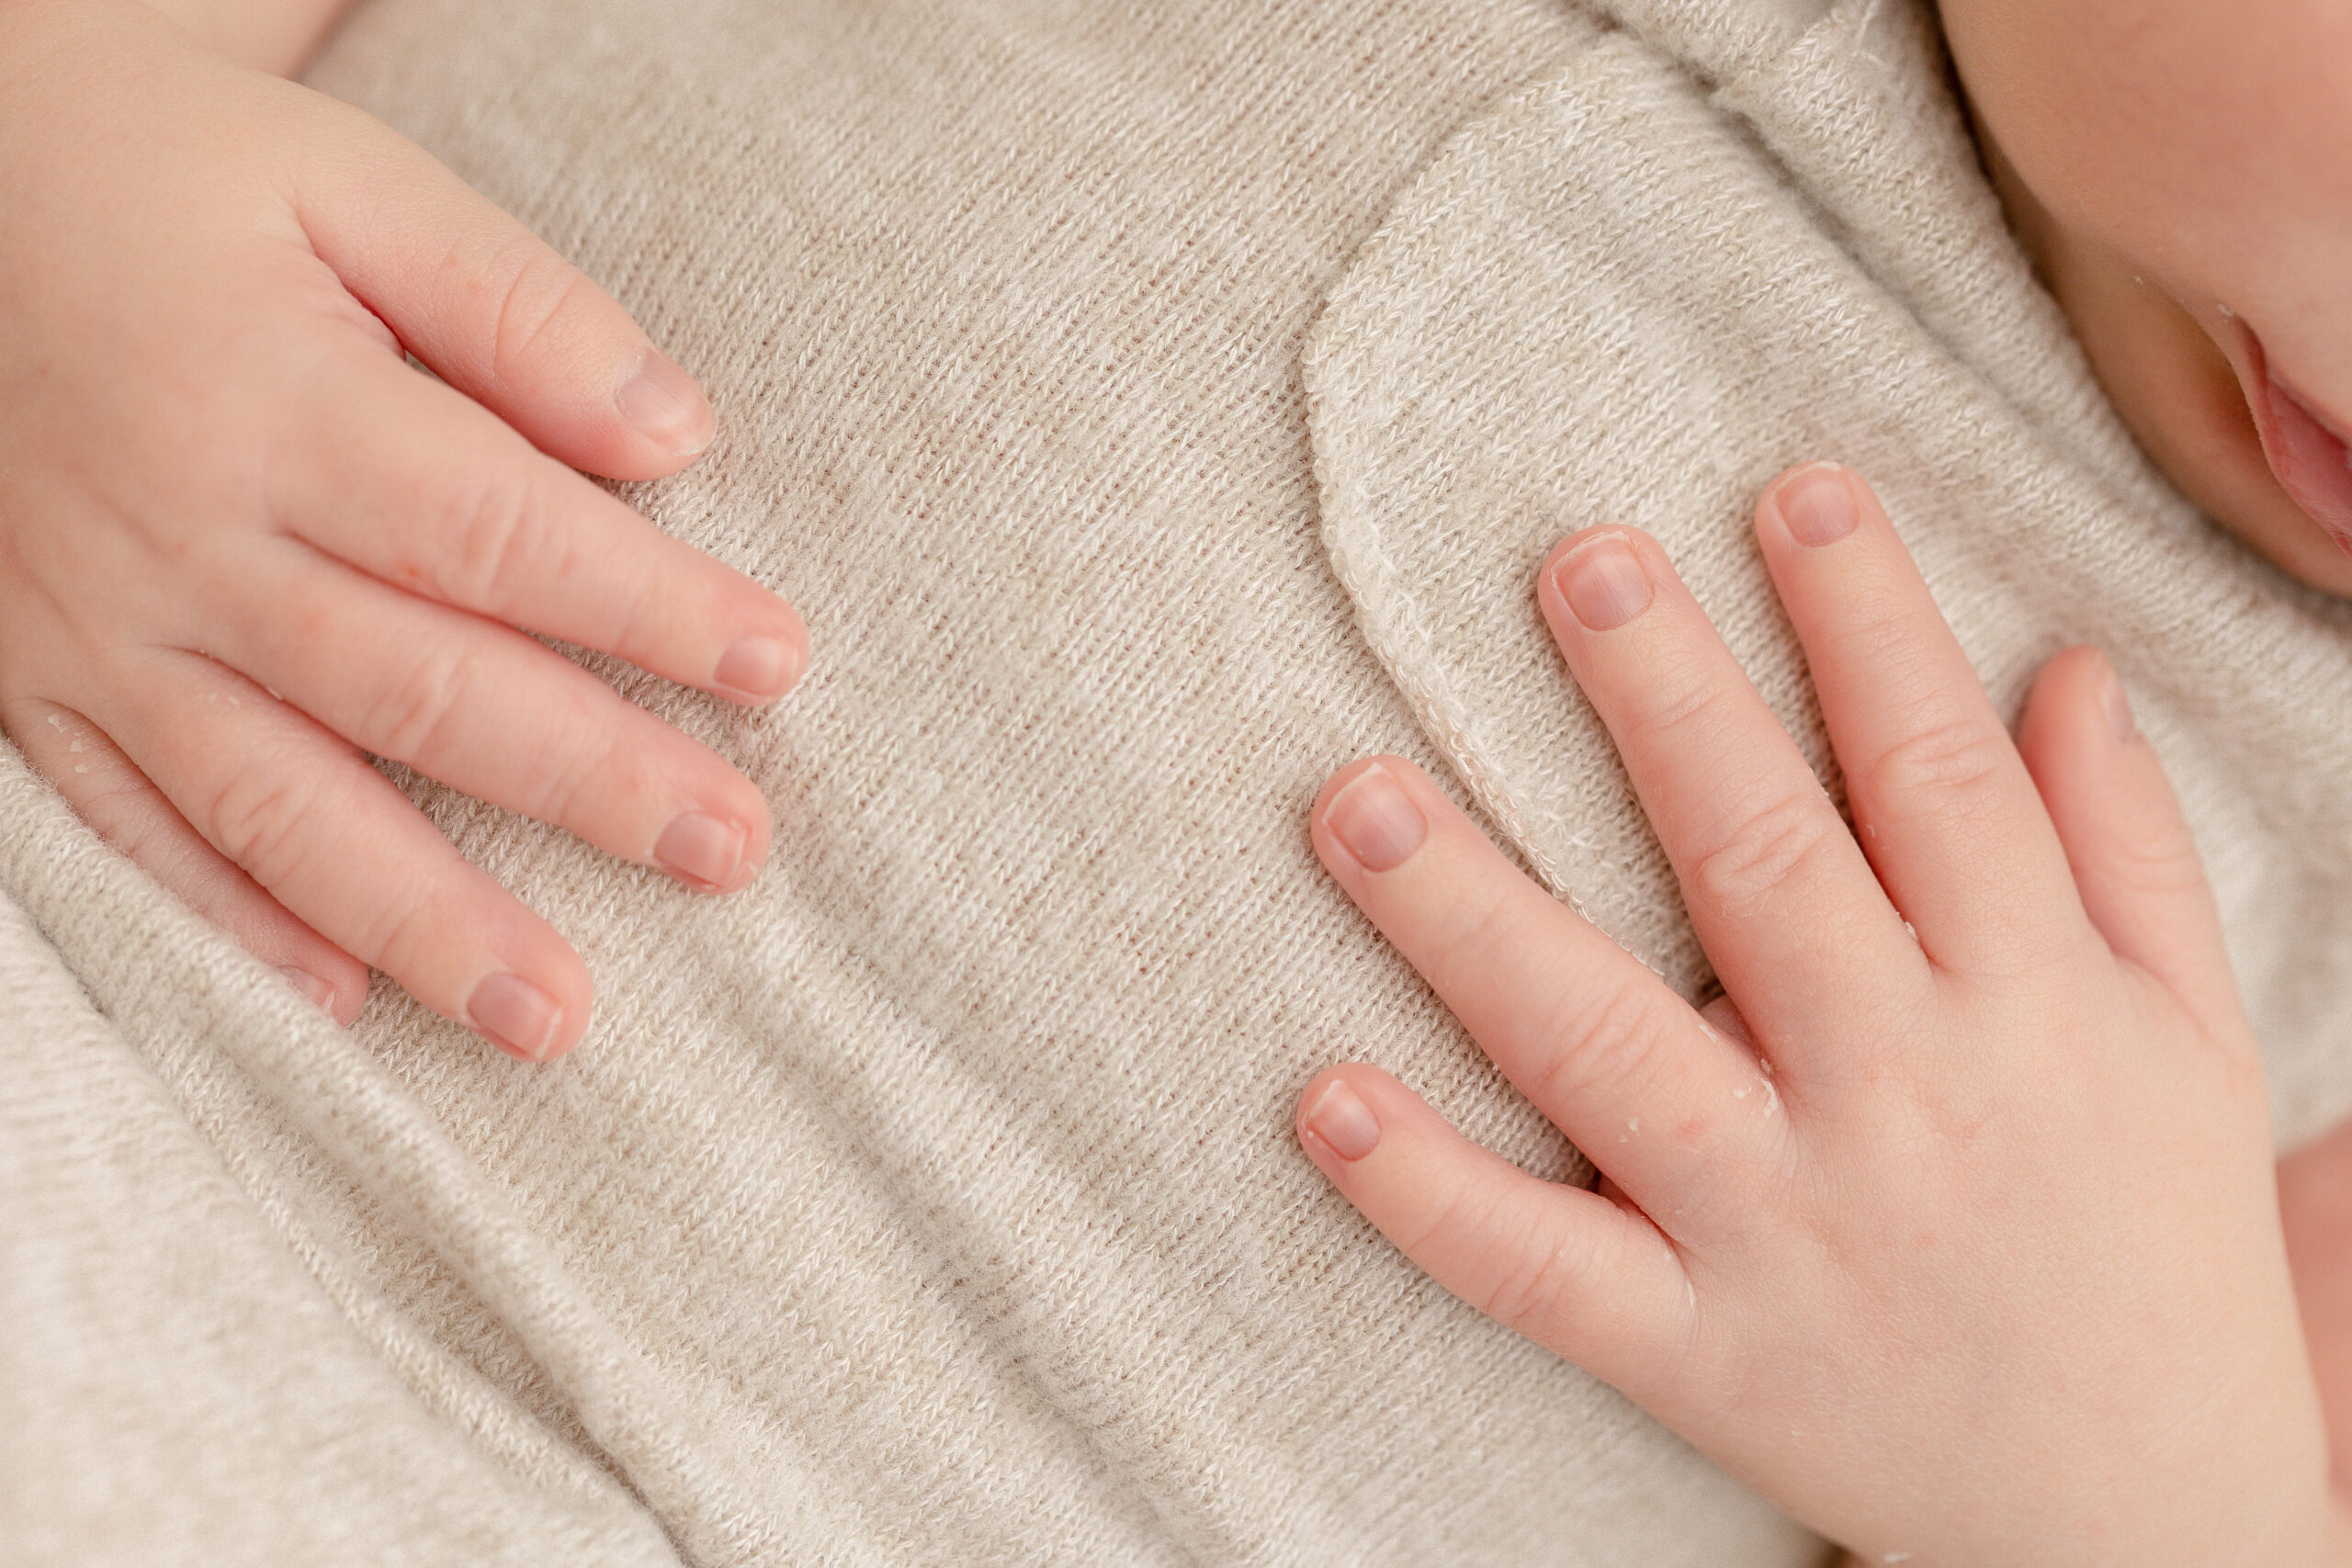 details of a baby's hands